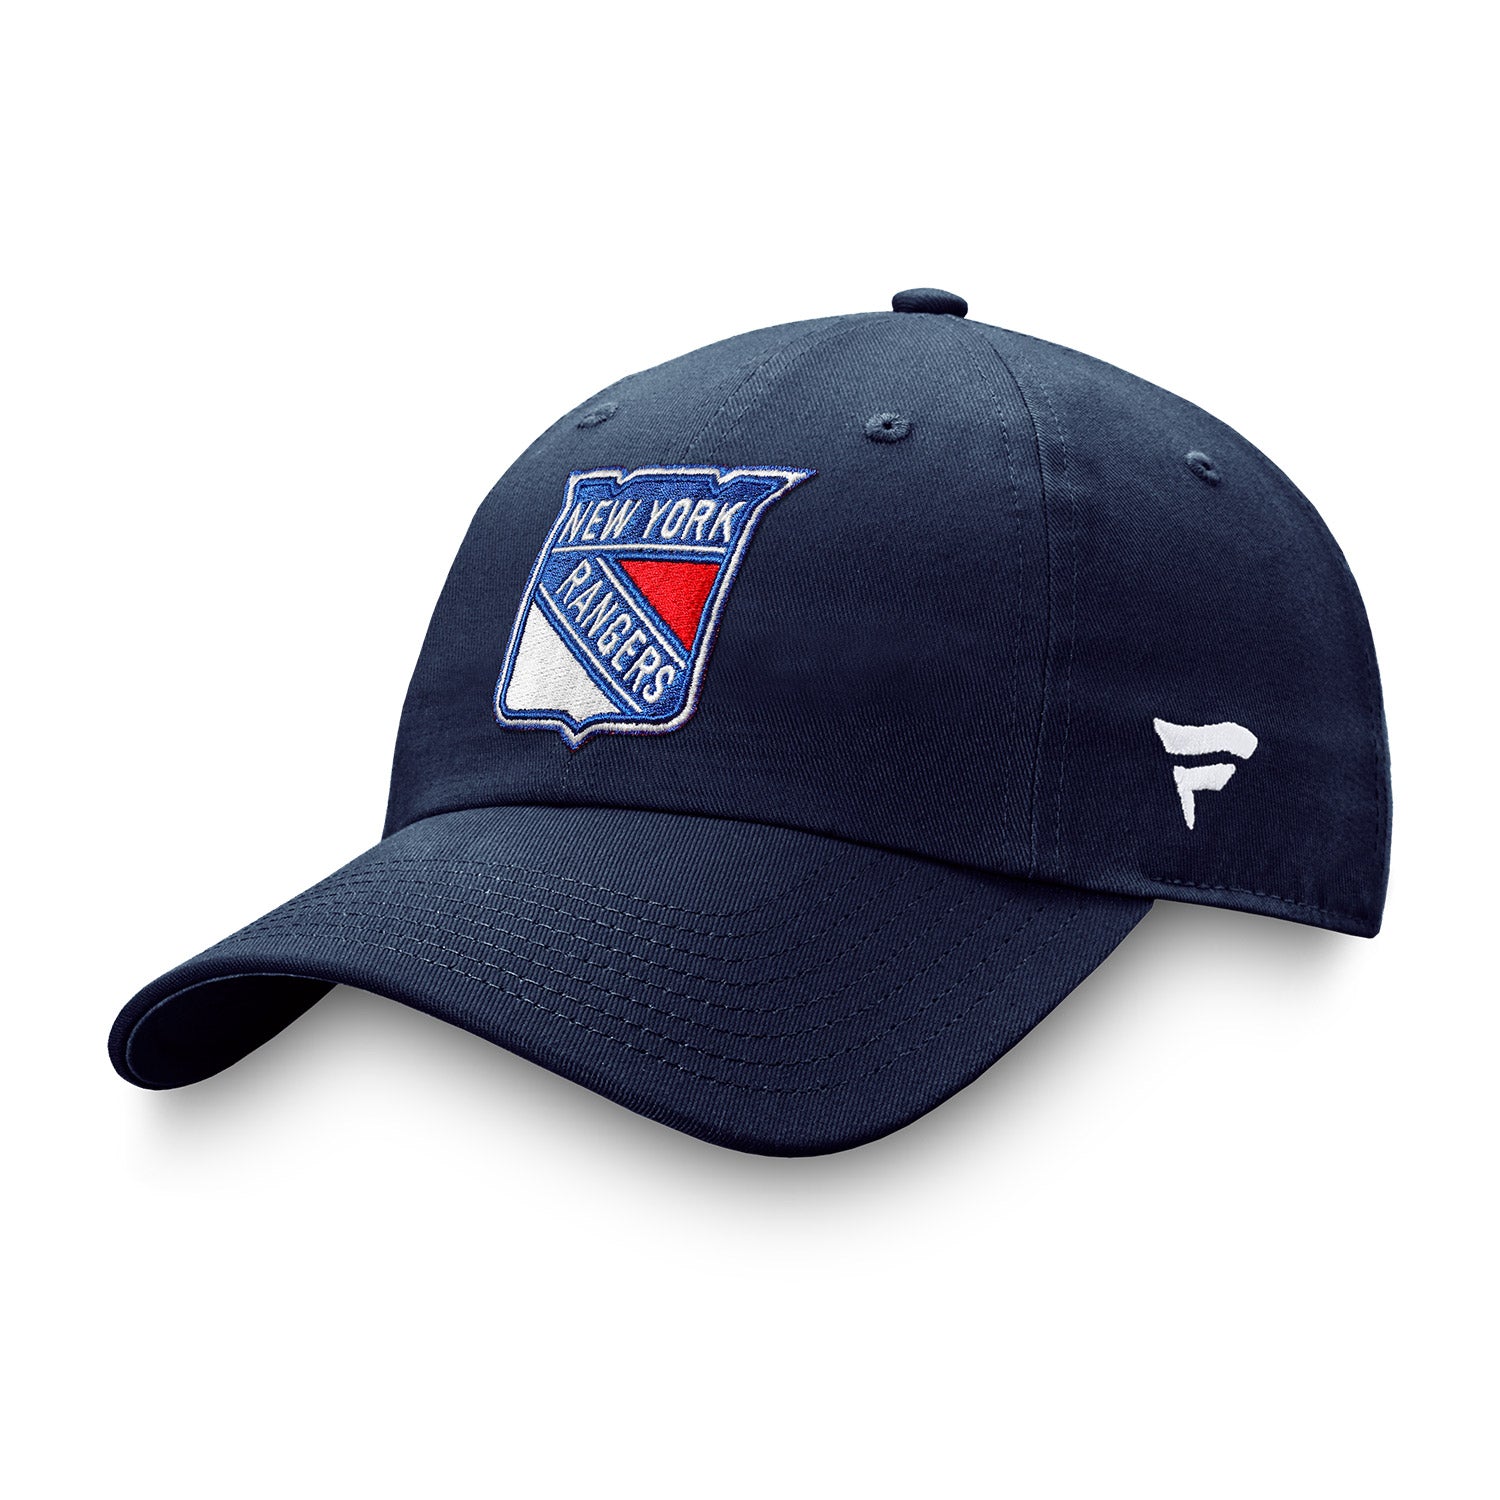 Official New York Yankees Playoffs Gear, Yankees Postseason Tees, Hats,  Hoodies, Collectibles